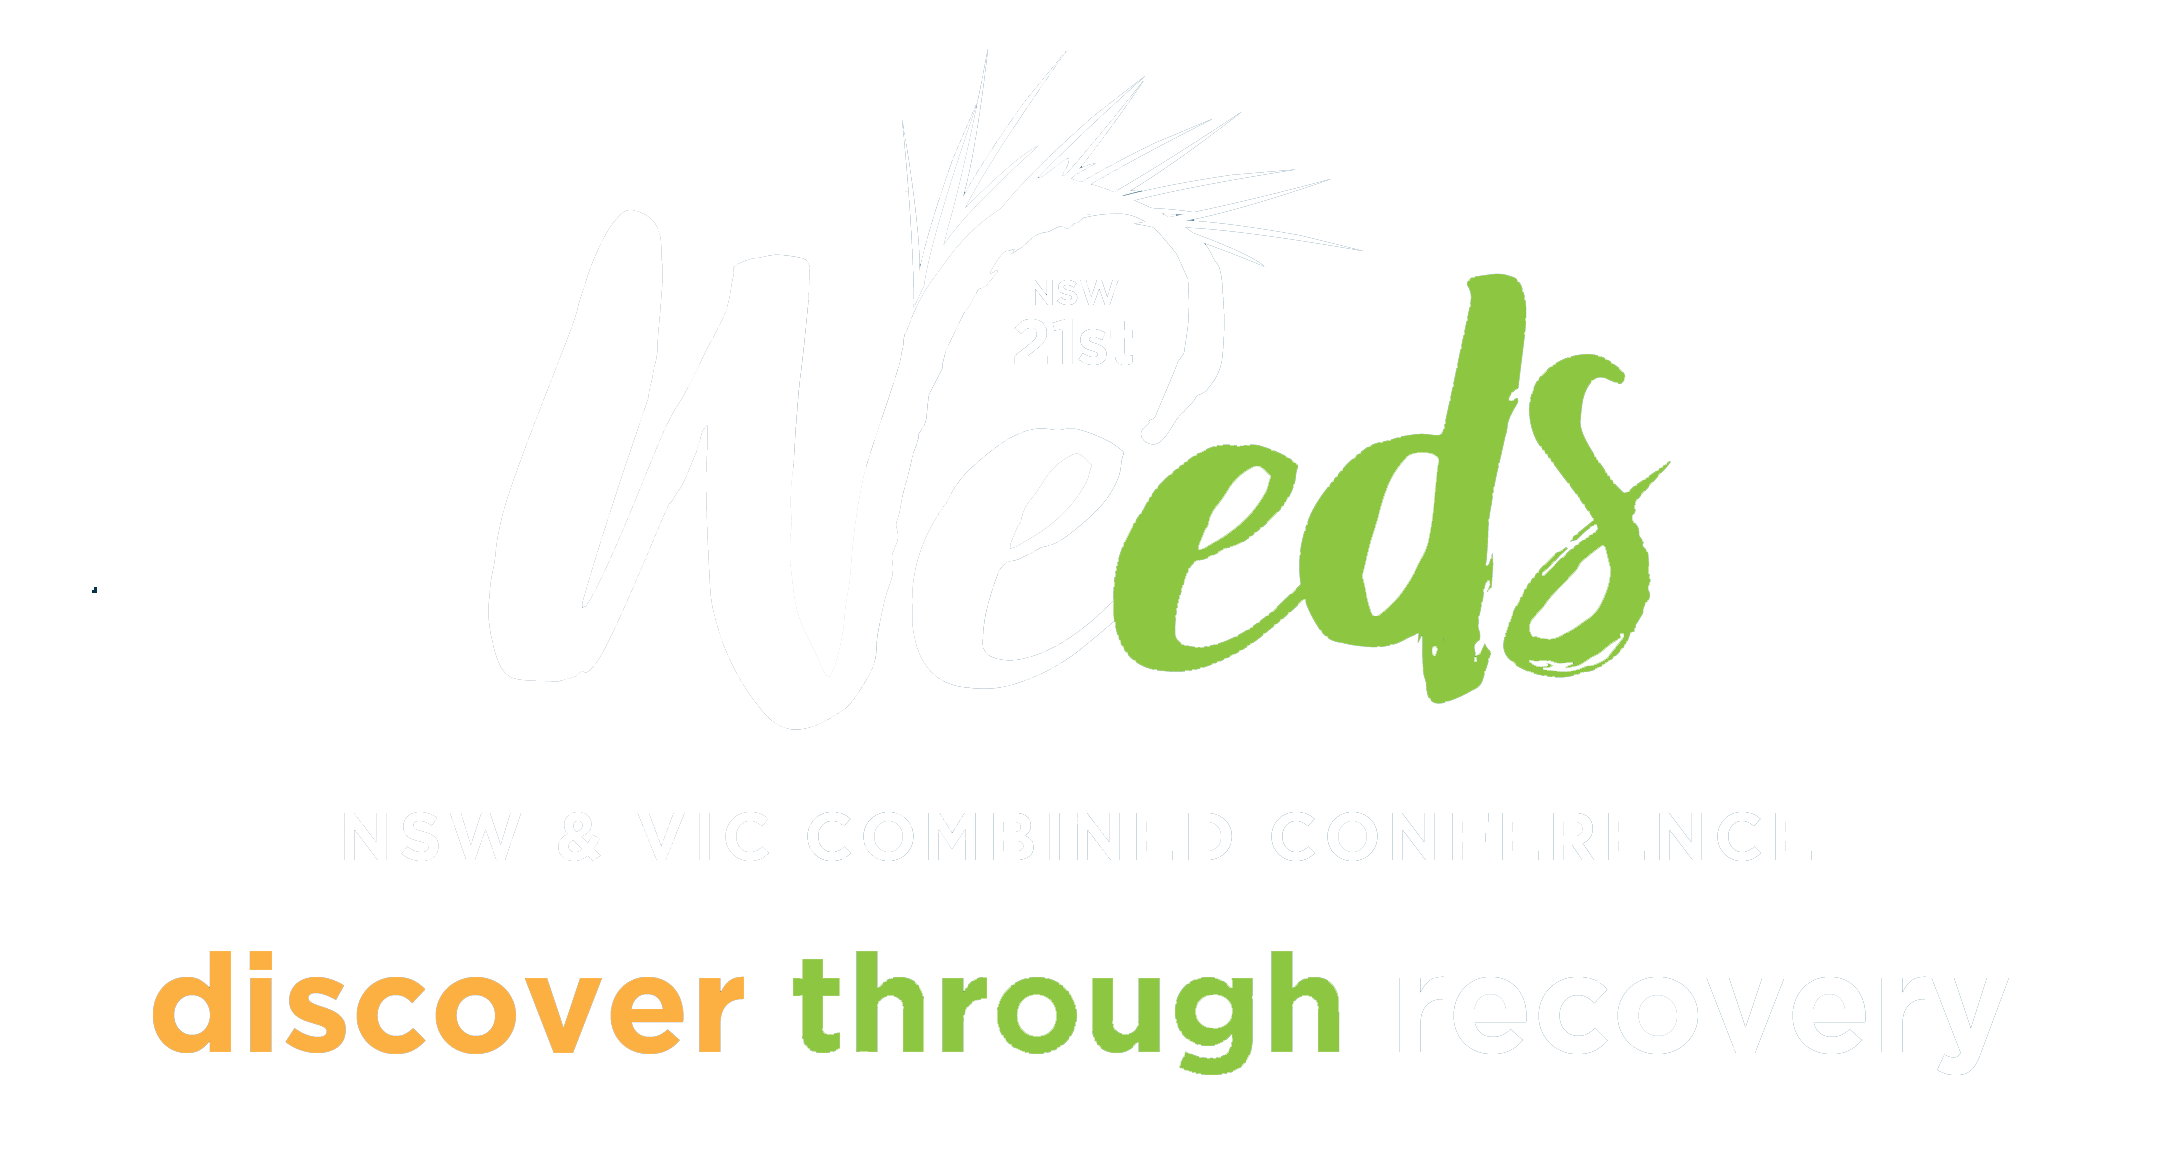 NSW Weeds Conference